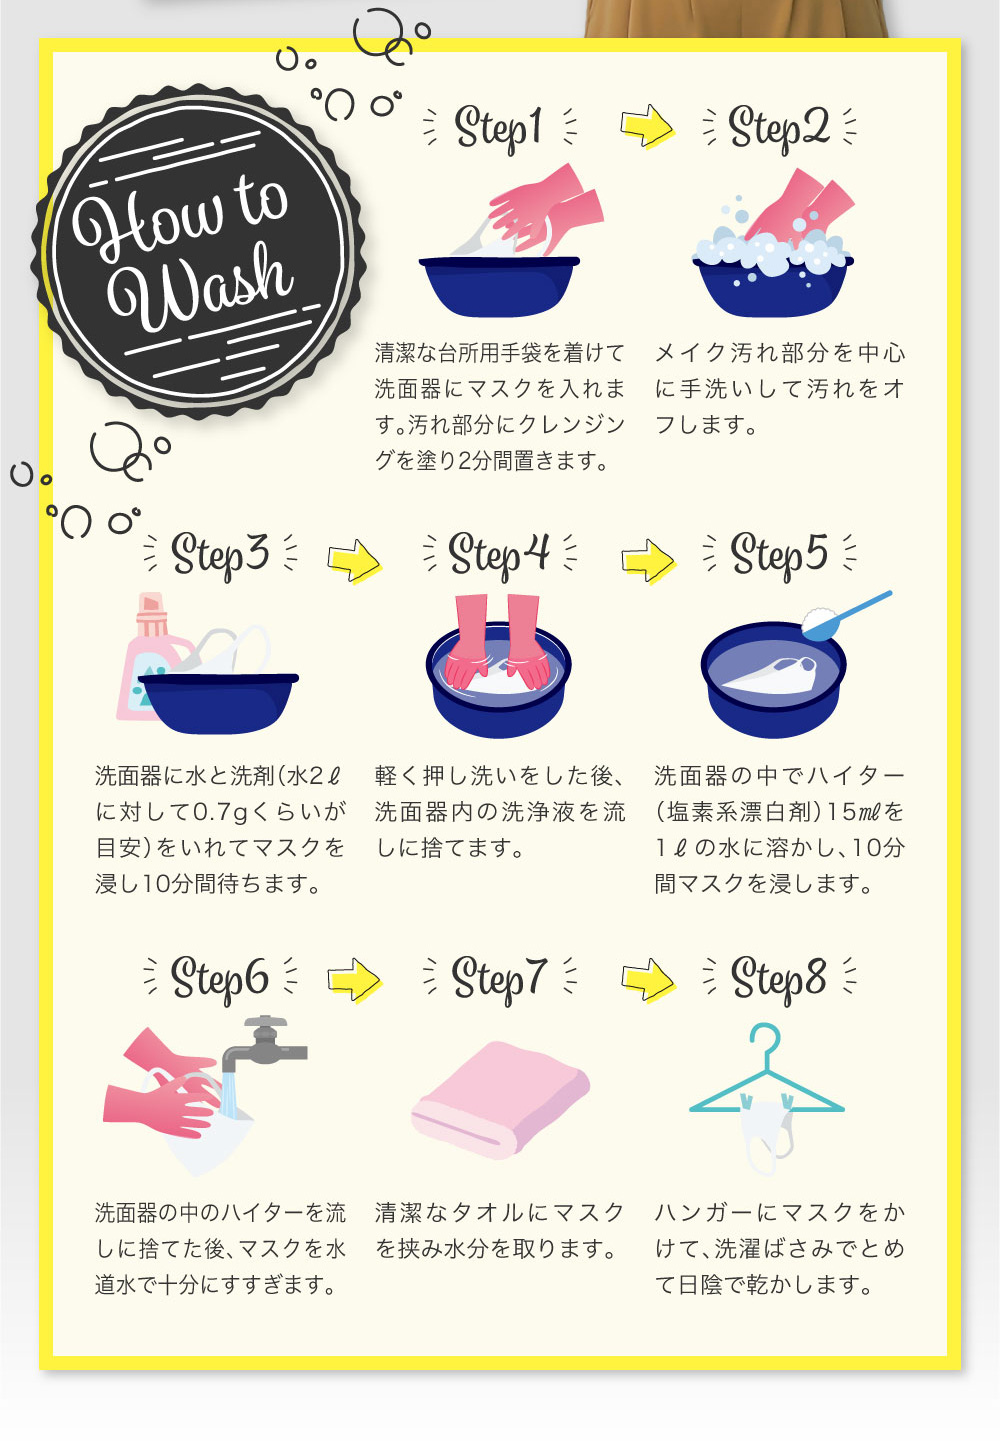 How to Wash